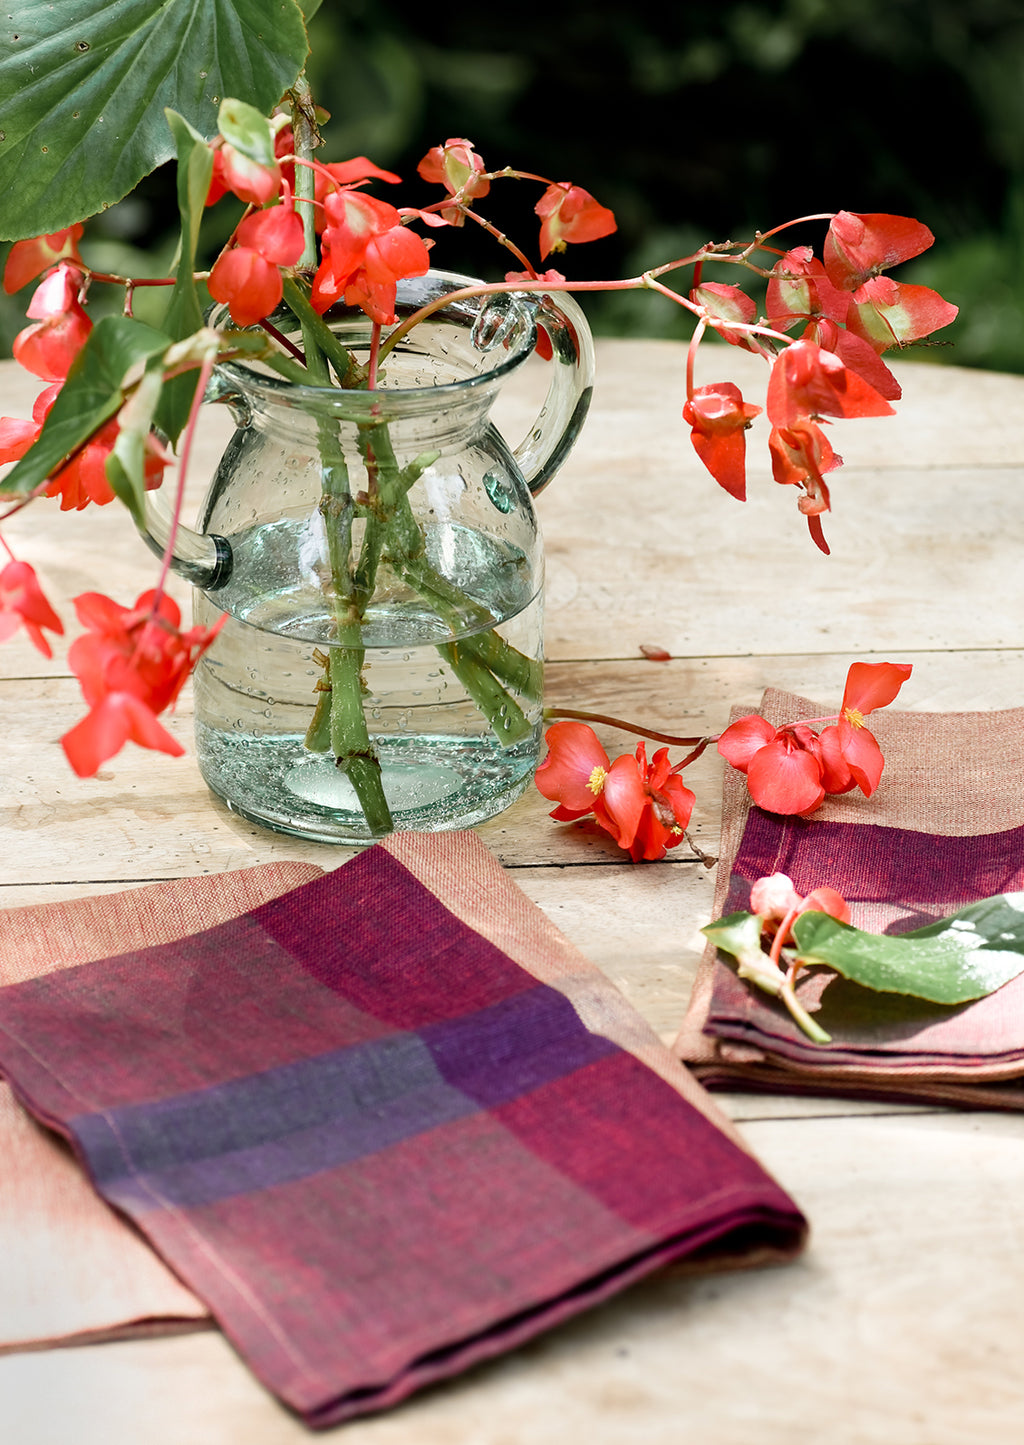 2: A pair of color overlay linen napkins on a table.